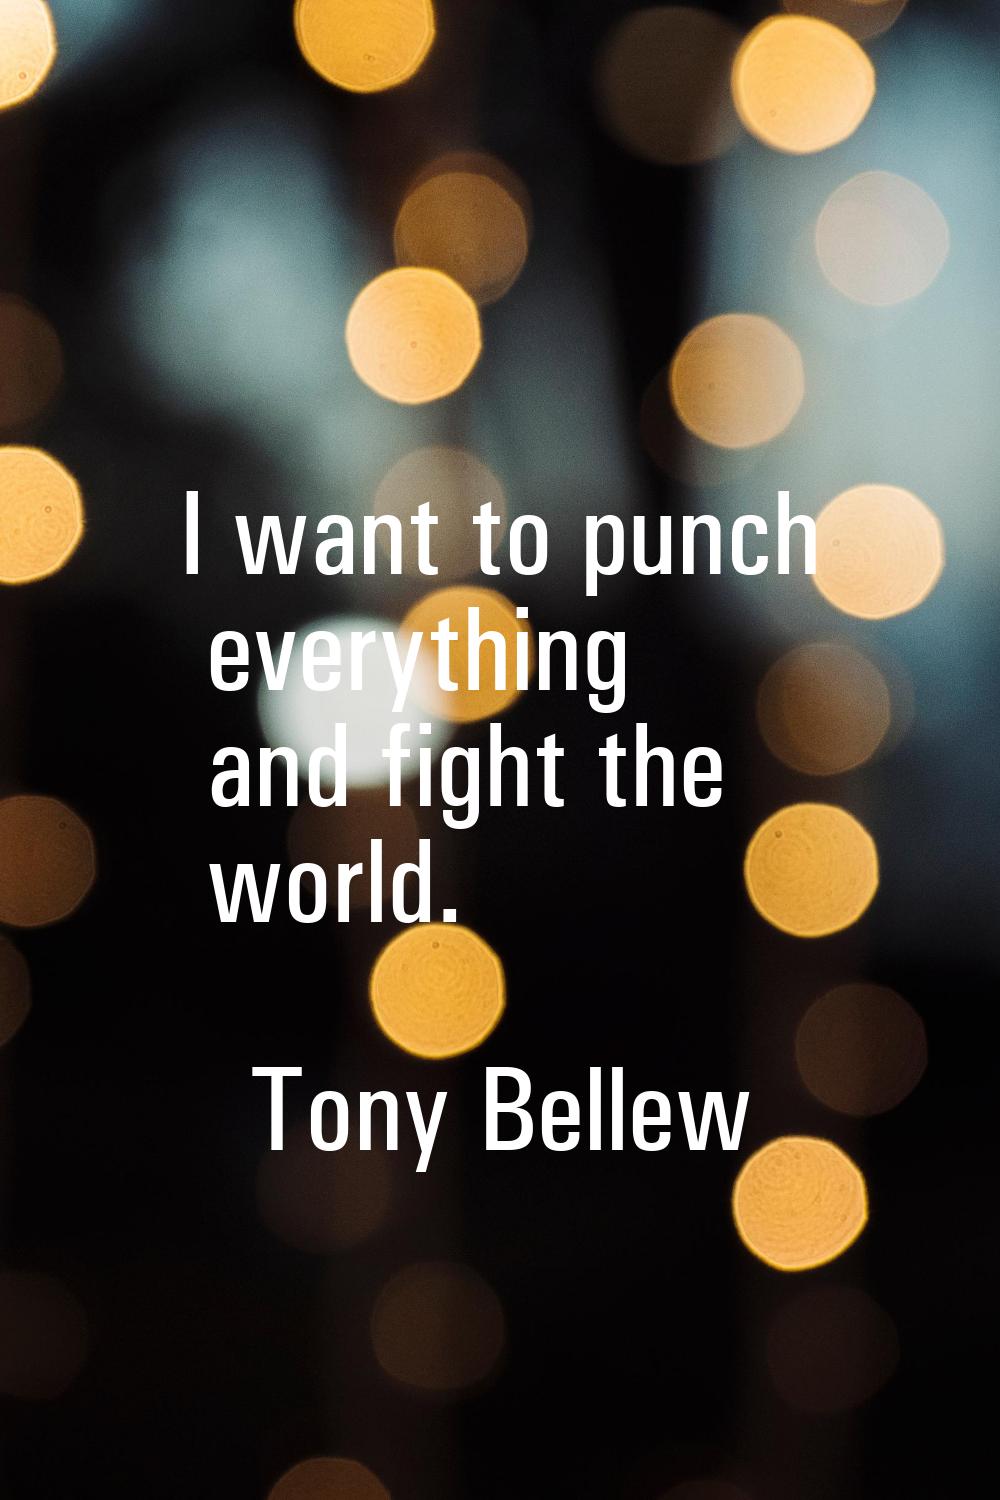 I want to punch everything and fight the world.